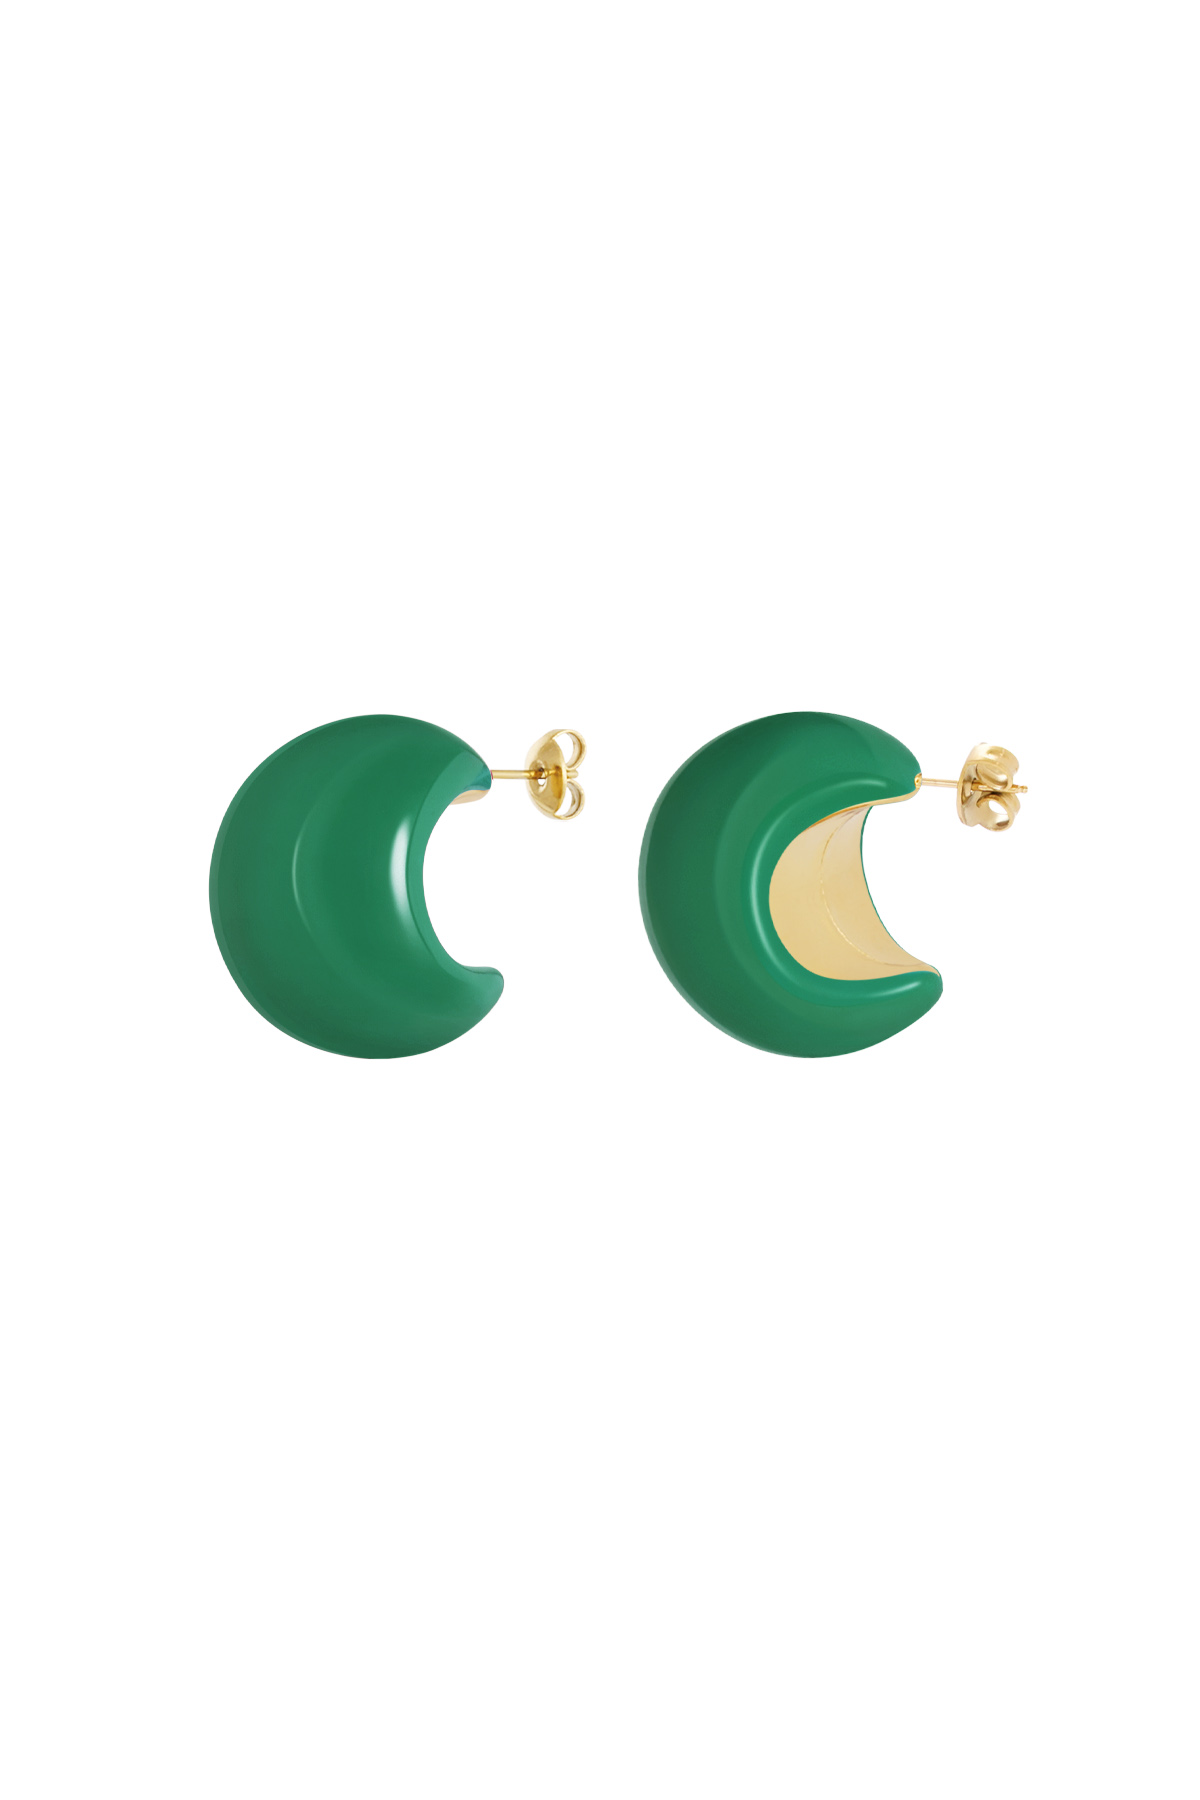 Colorful crescent moon earrings - green h5 